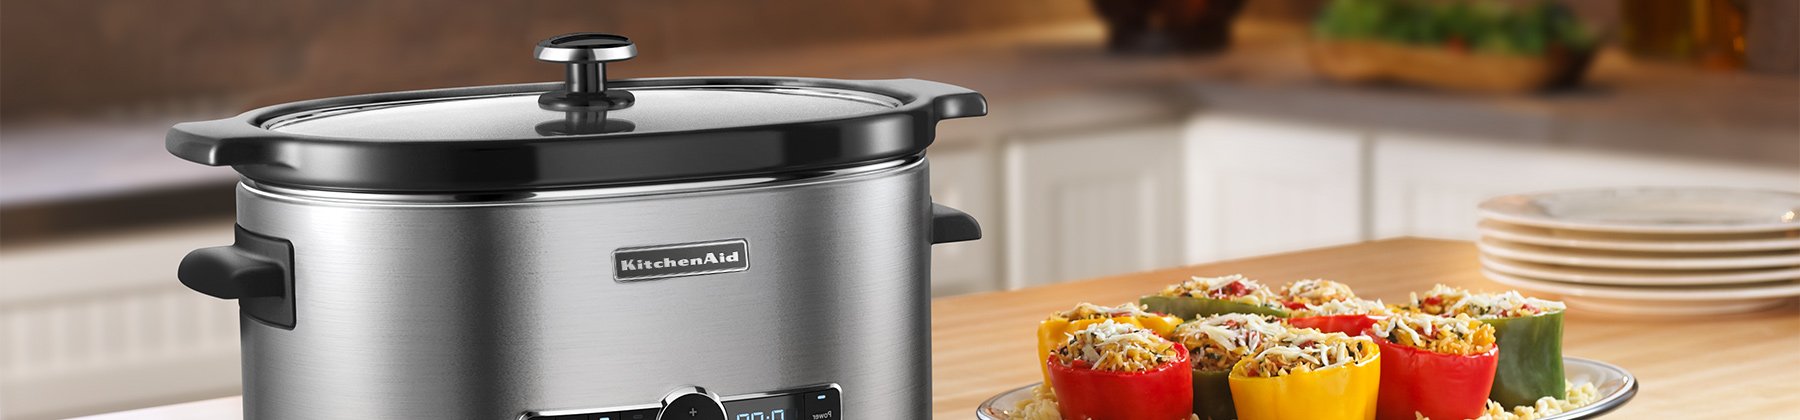 Slow Cookers, Pressure Cookers & Multi Cookers, Frying, Grilling & Cooking